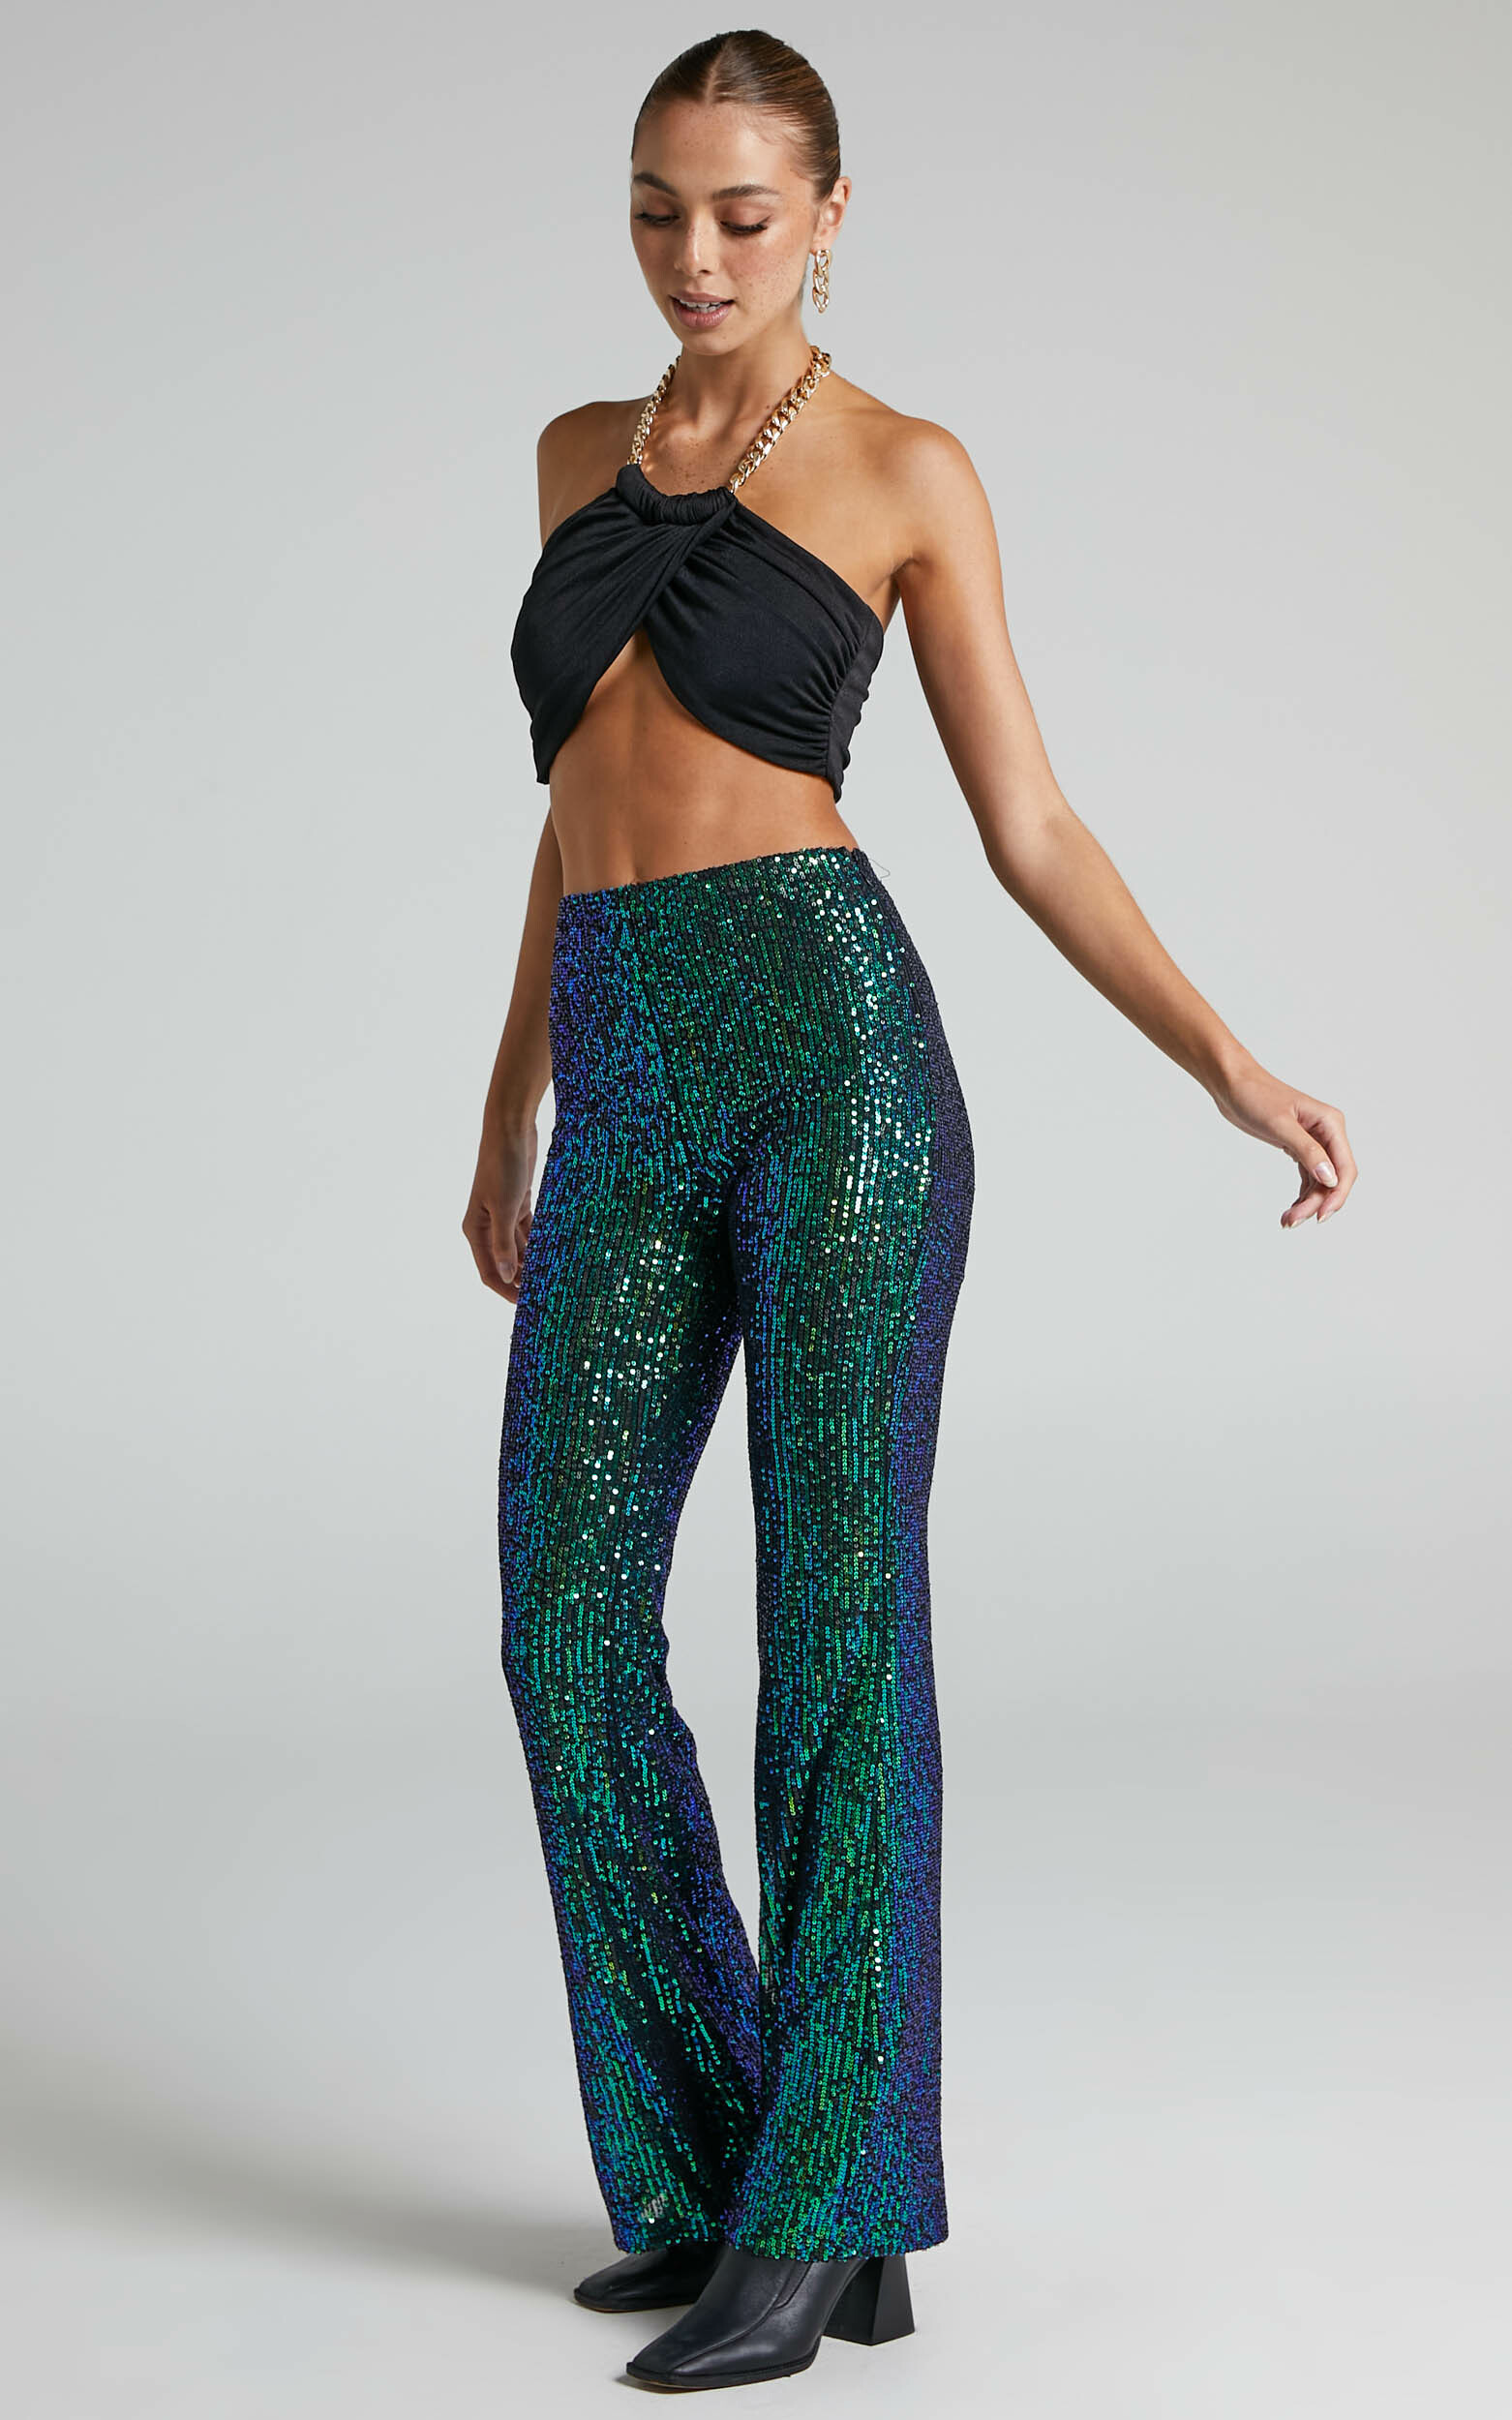 Deliza High Waisted Sequin Flare Pants in Mermaid Teal - 06, GRN1, hi-res image number null